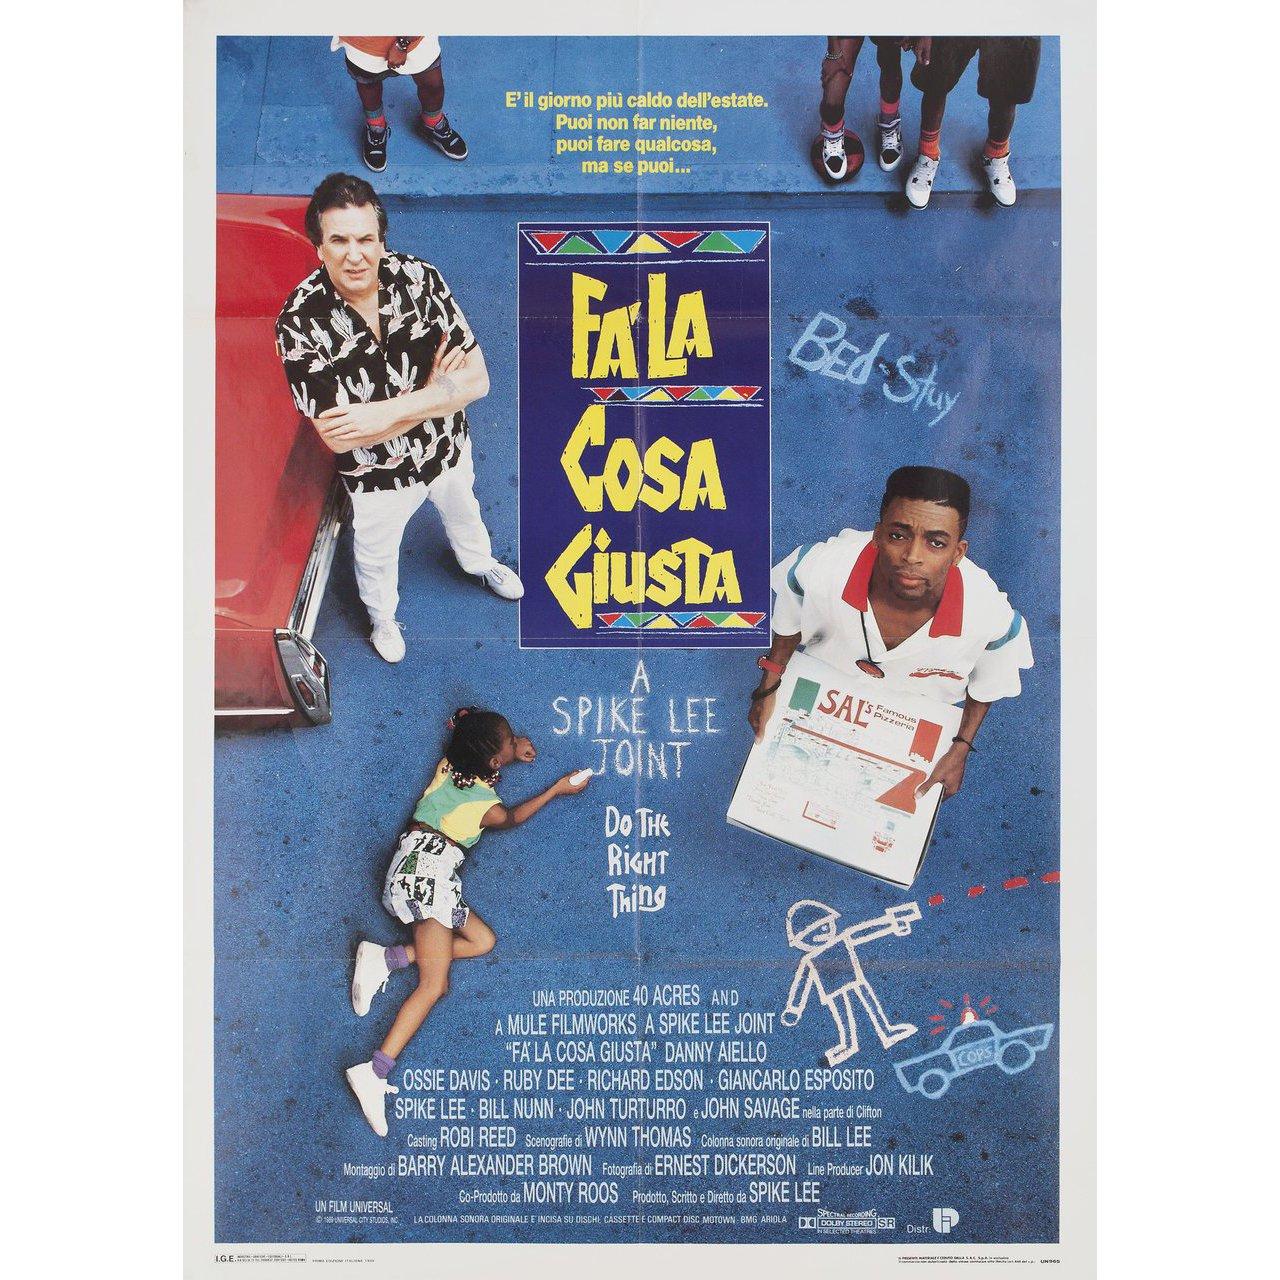 Original 1989 Italian due fogli poster for the film Do the Right Thing directed by Spike Lee with Danny Aiello / John Turturro / Ossie Davis / Ruby Dee / Richard Edson. Very Good-Fine condition, rolled. Please note: the size is stated in inches and